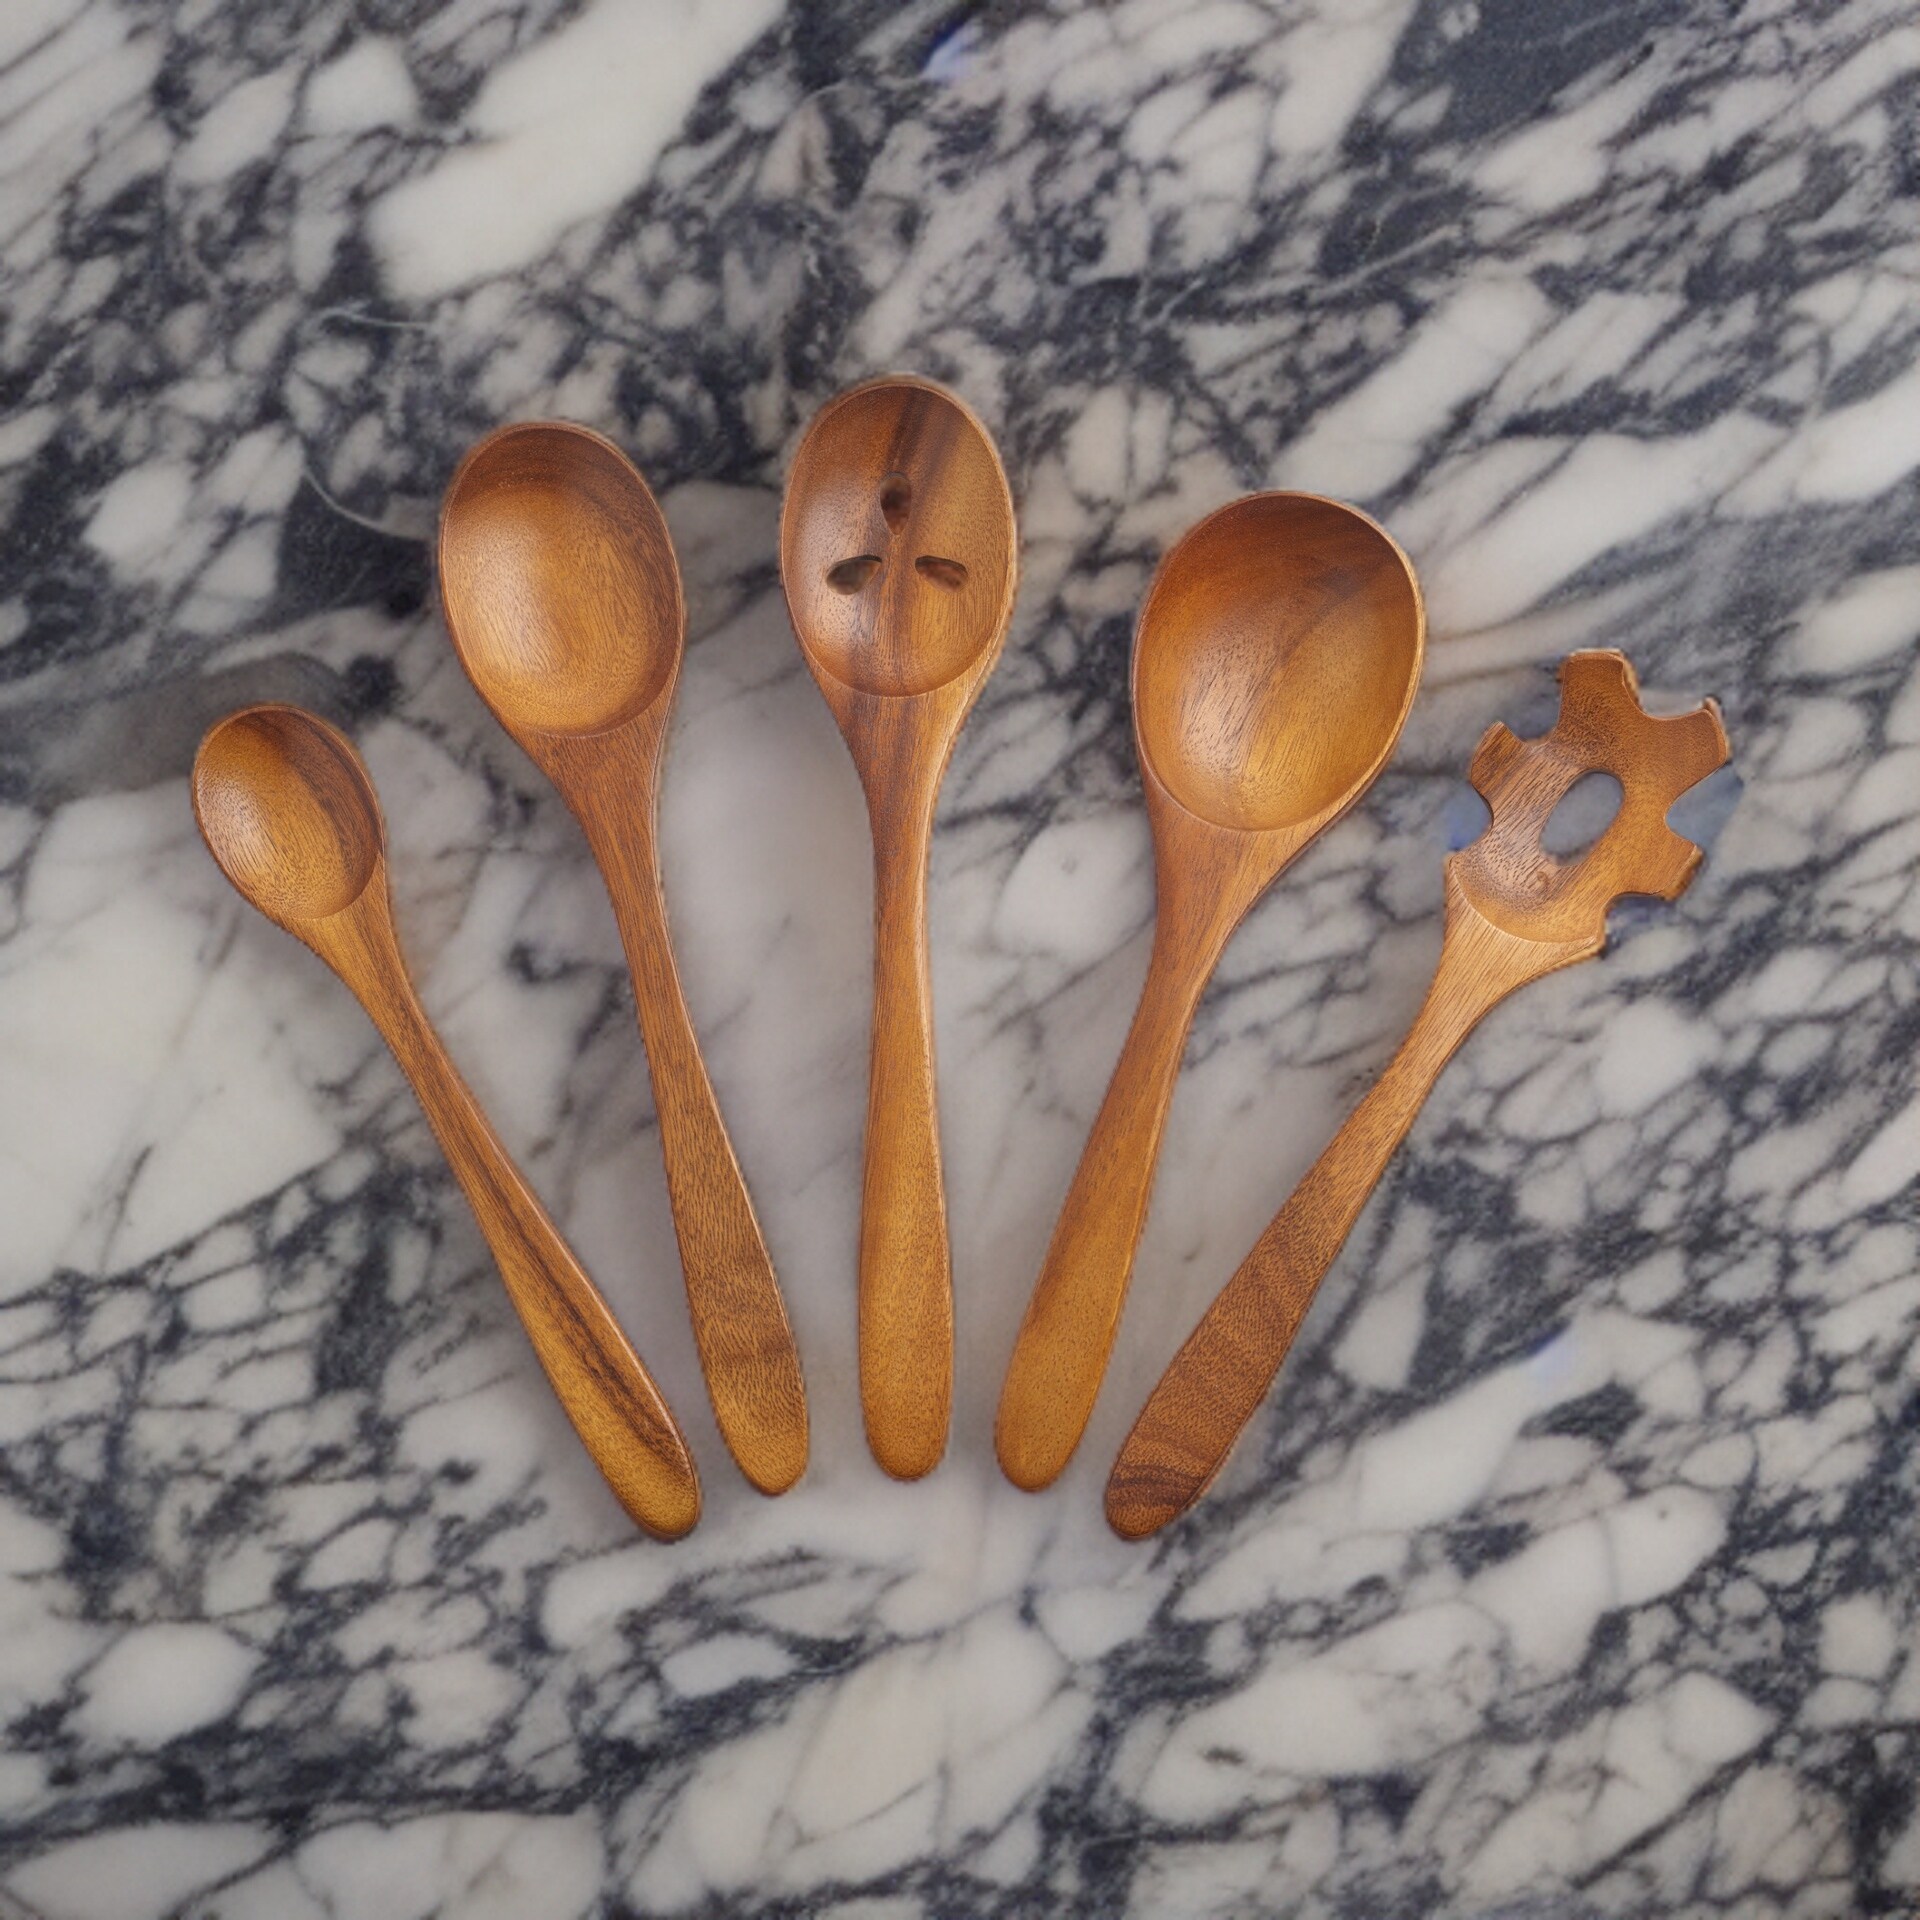 https://ak1.ostkcdn.com/images/products/is/images/direct/9fe1ba019e96a9293b6389c82de23d5208b22a86/Nambe-Tulip-Wood-Kitchen-Tools-5-Piece-Set-Kitchen-Cooking-Utensils.jpg